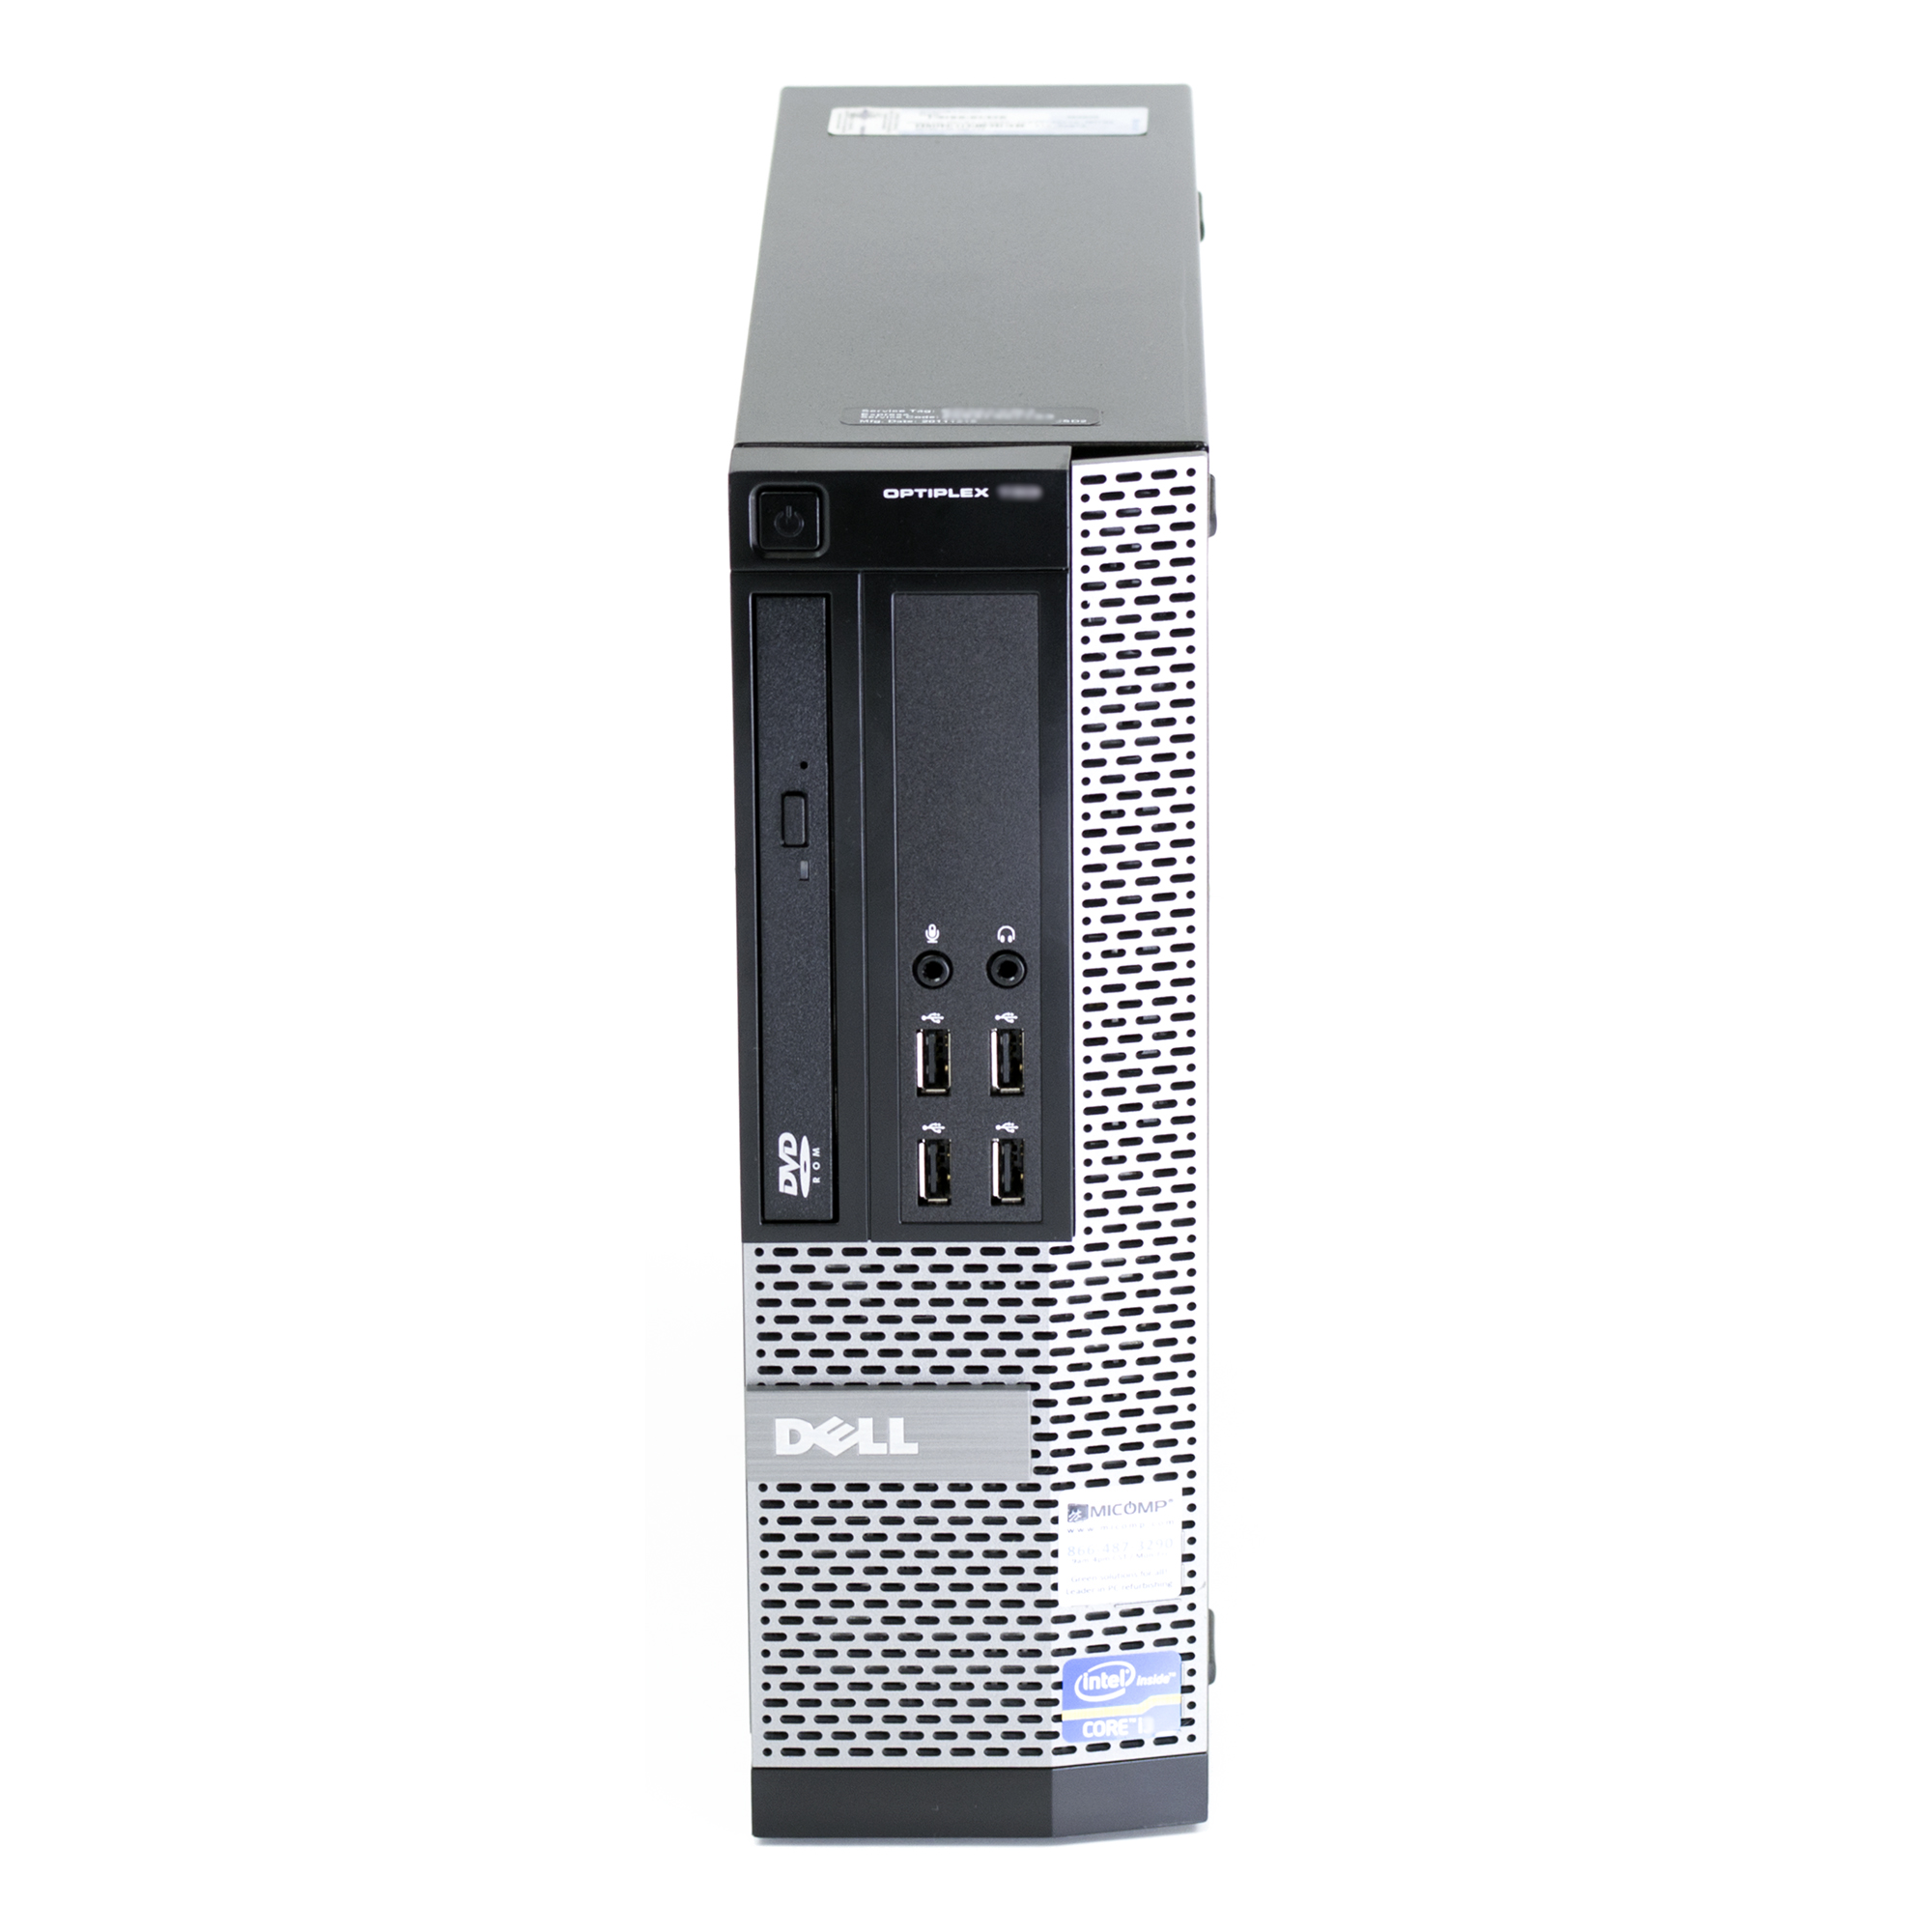 Dell Optiplex 3010 Desktop Computer Intel Core i5 3470 8GB RAM 500GB SSD Windows 10 Home PC, New Free keyboard and Mouse, WiFi Adapter, Black - image 3 of 6